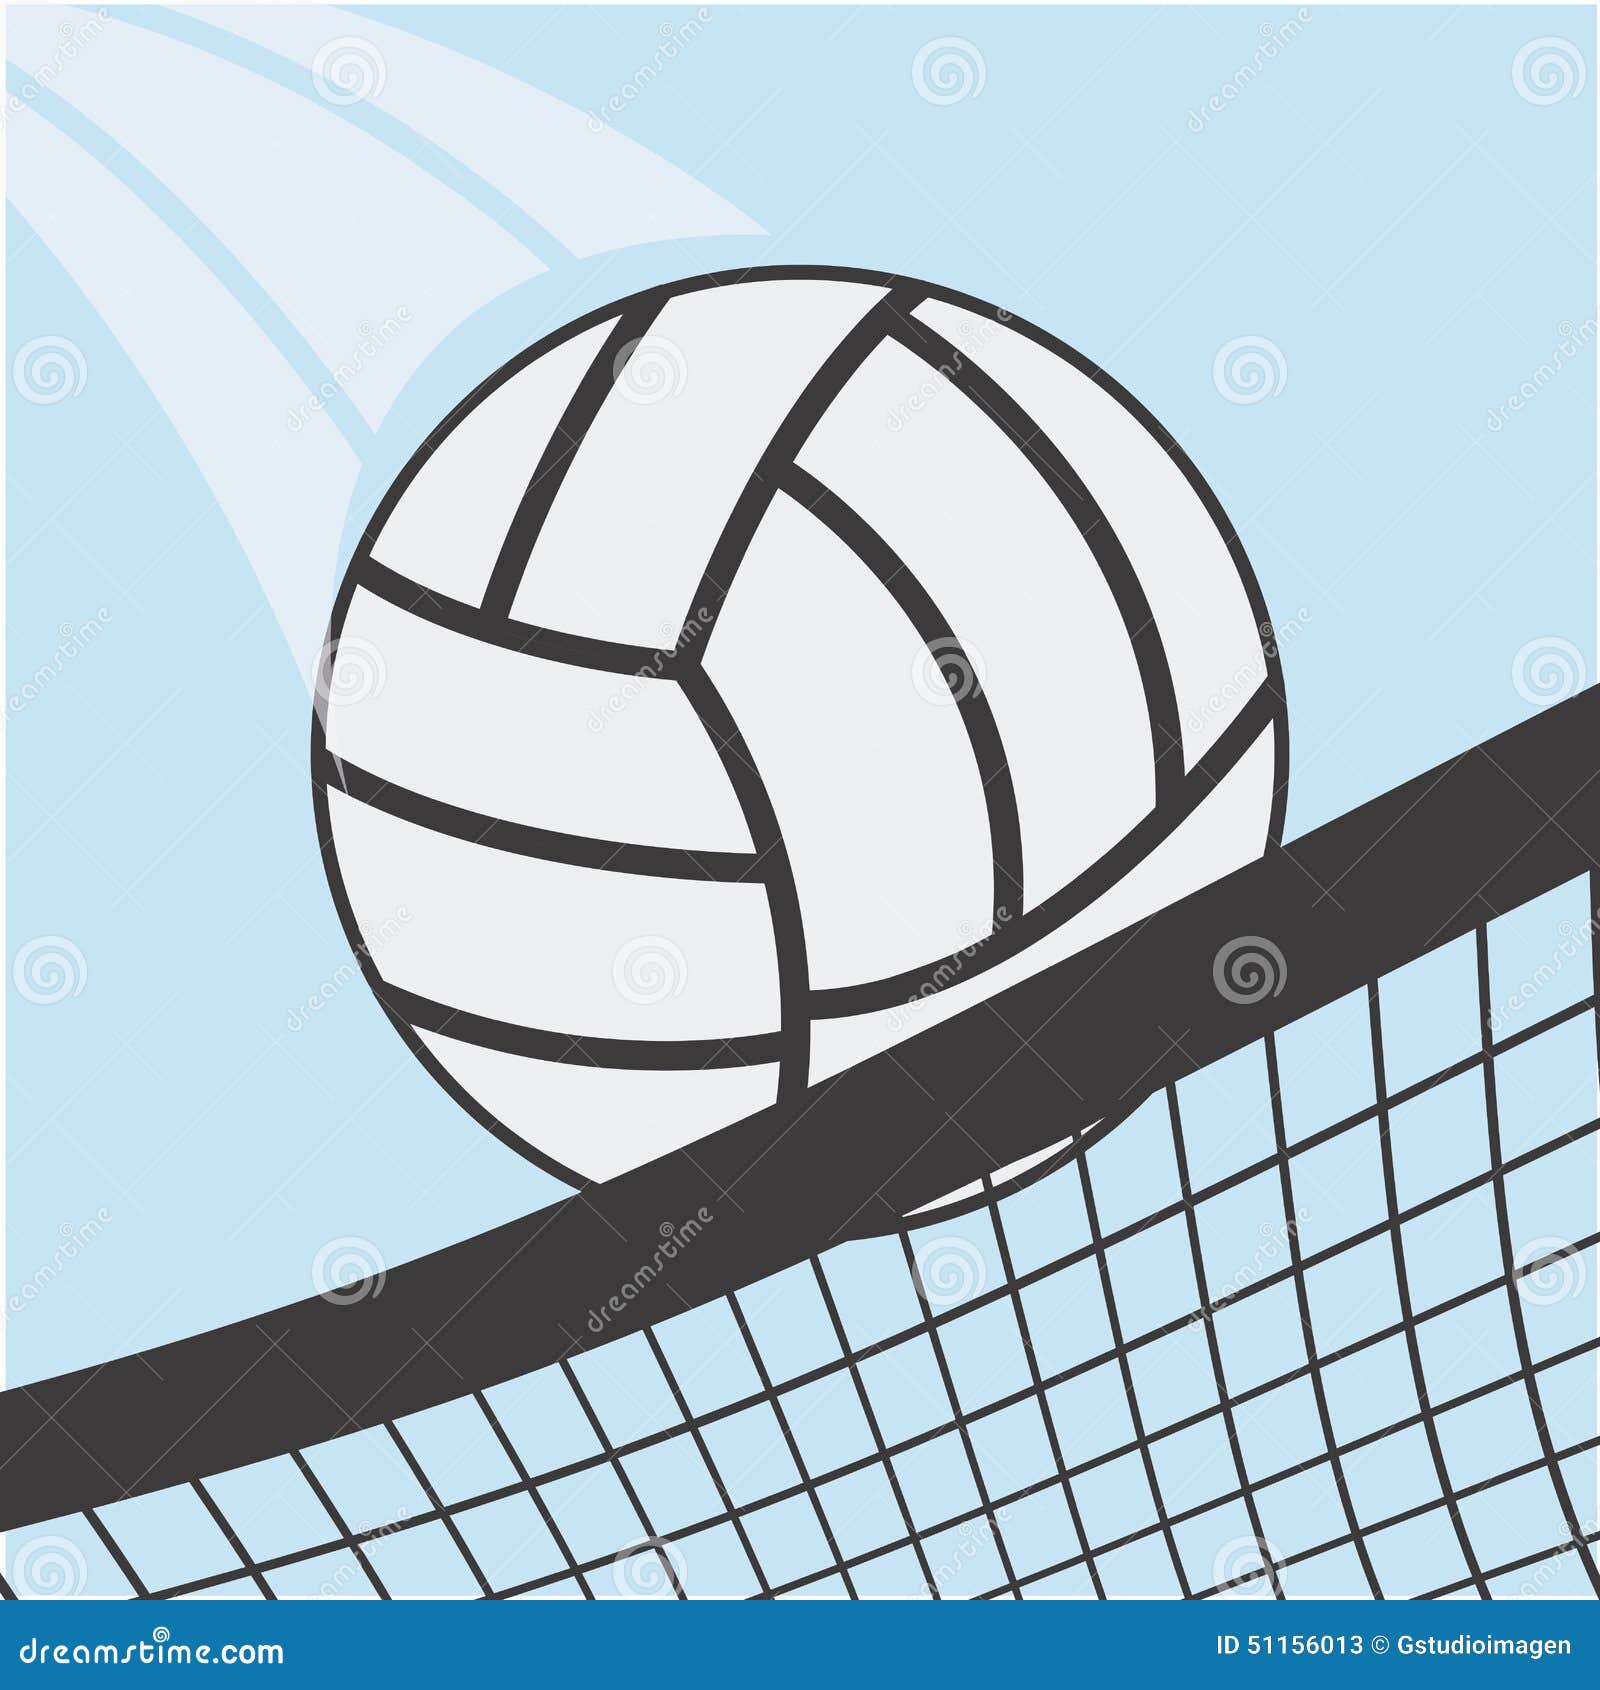 Volleyball sport stock vector. Illustration of tournament - 51156013